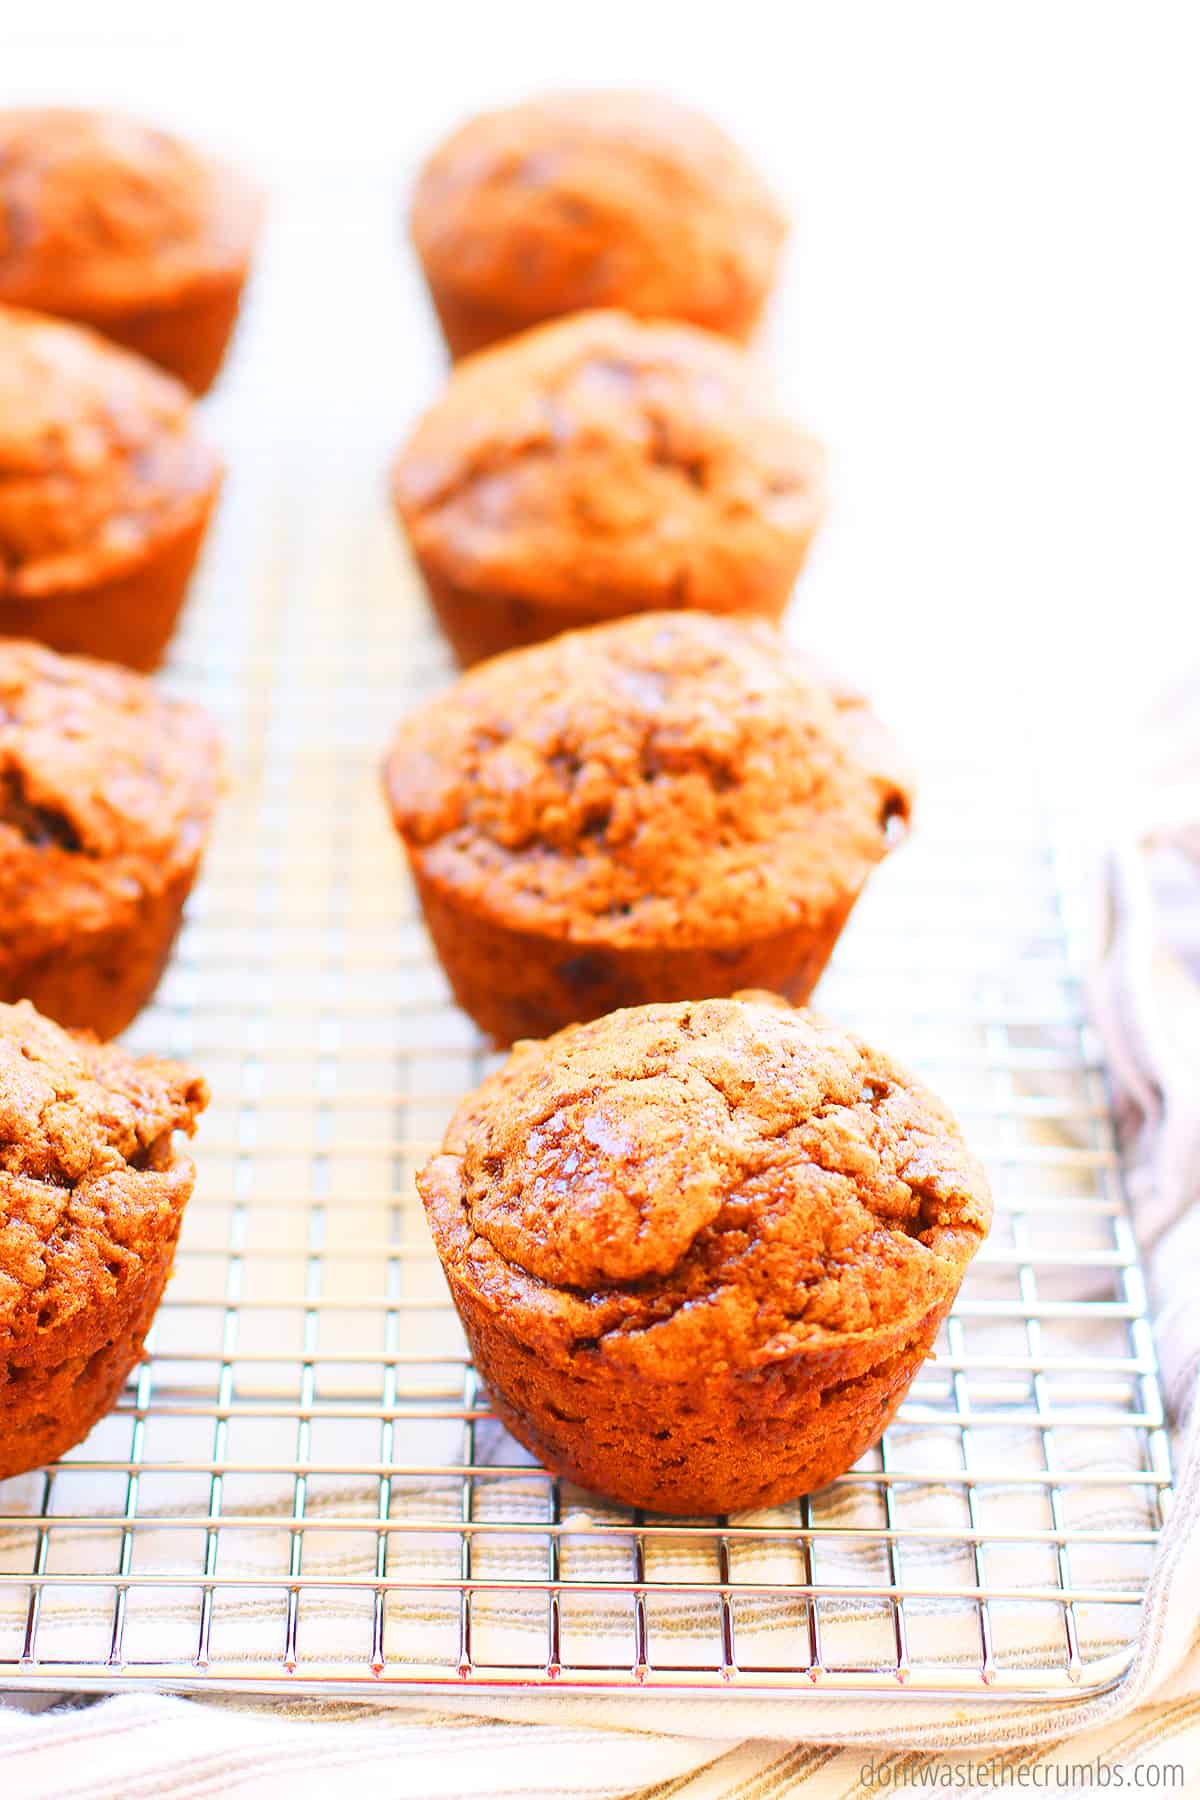 A freshly baked batch of applesauce muffins cools on a wire rack. Golden brown with a warm crusty top, these applesauce muffins are moist and delicious.